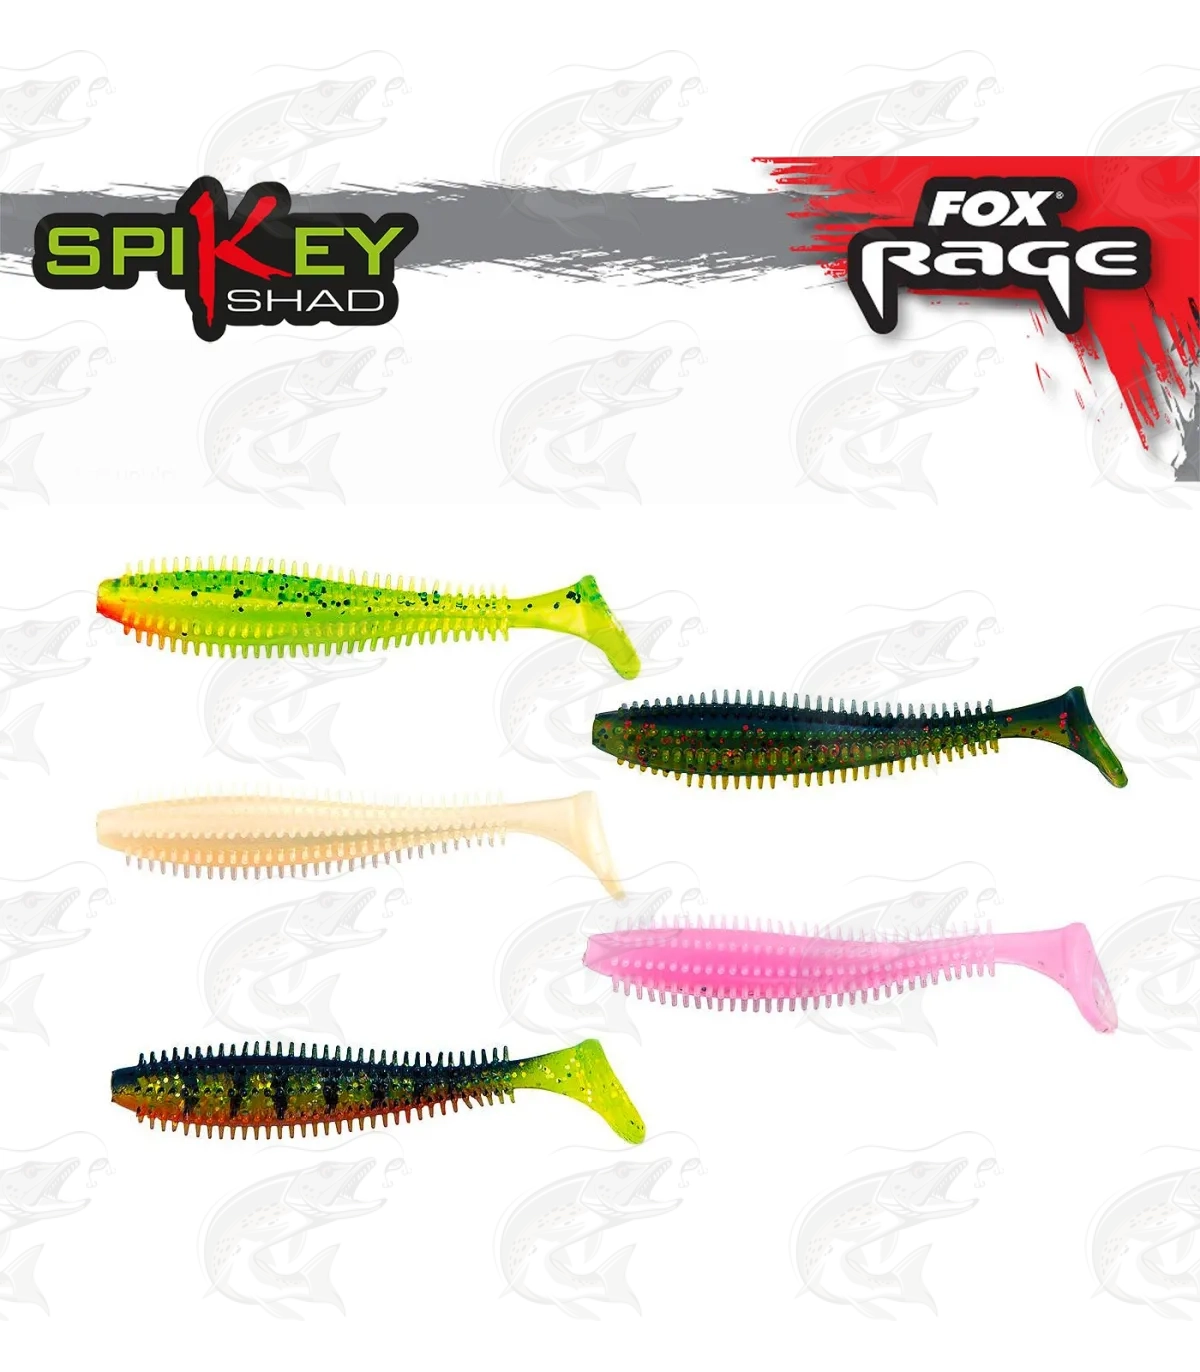 Fox Rage Spikey Shad Unloaded Mixed Colours 5pk ALL SIZES Fishing tackle 